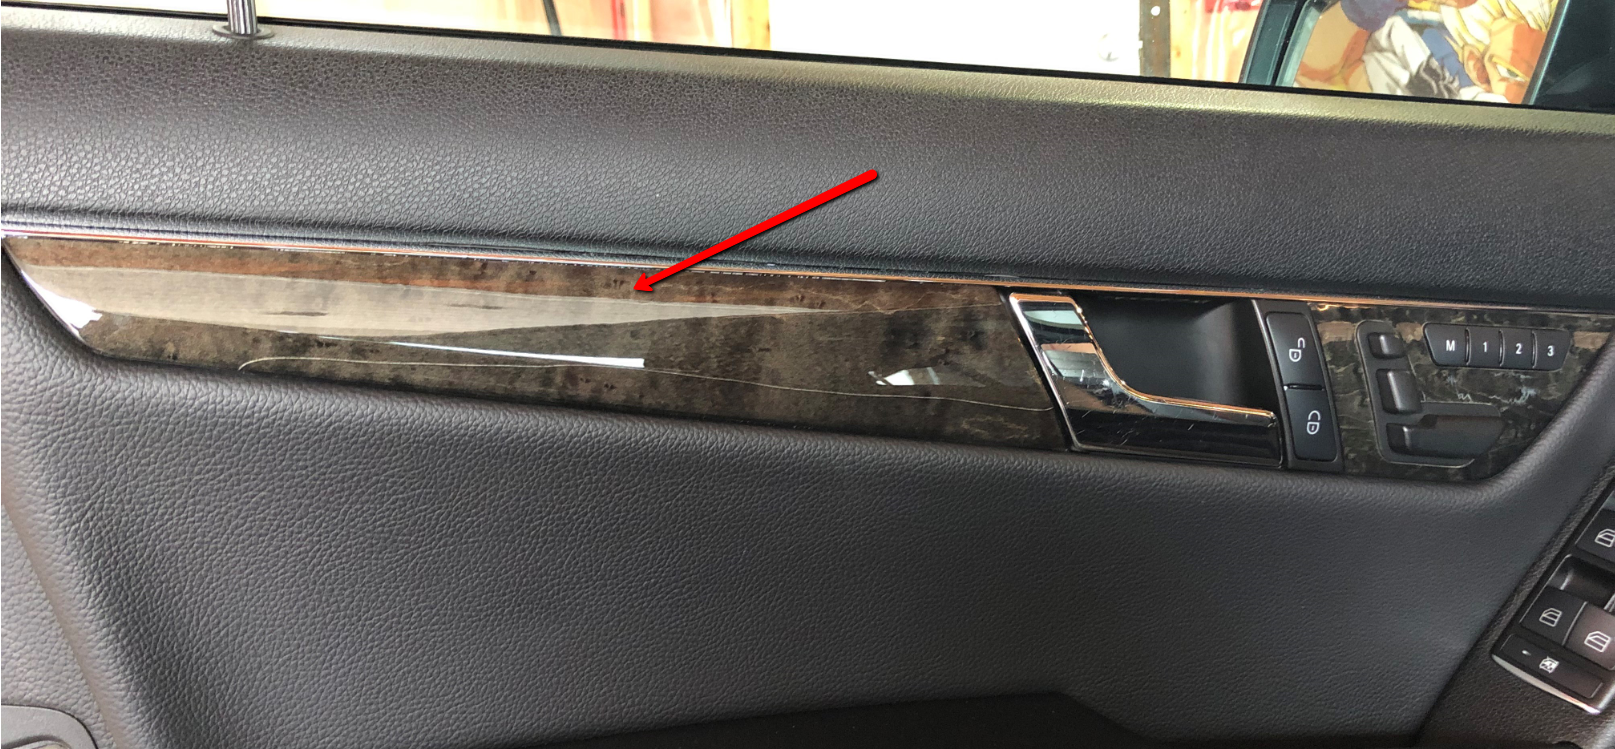 Interior/Upholstery - WANTED: 08-11 W204 Sedan Drivers side Black Birdseye Maple Wood Trim - New or Used - 2008 to 2011 Mercedes-Benz C350 - Calgary, AB T3A6E3, Canada